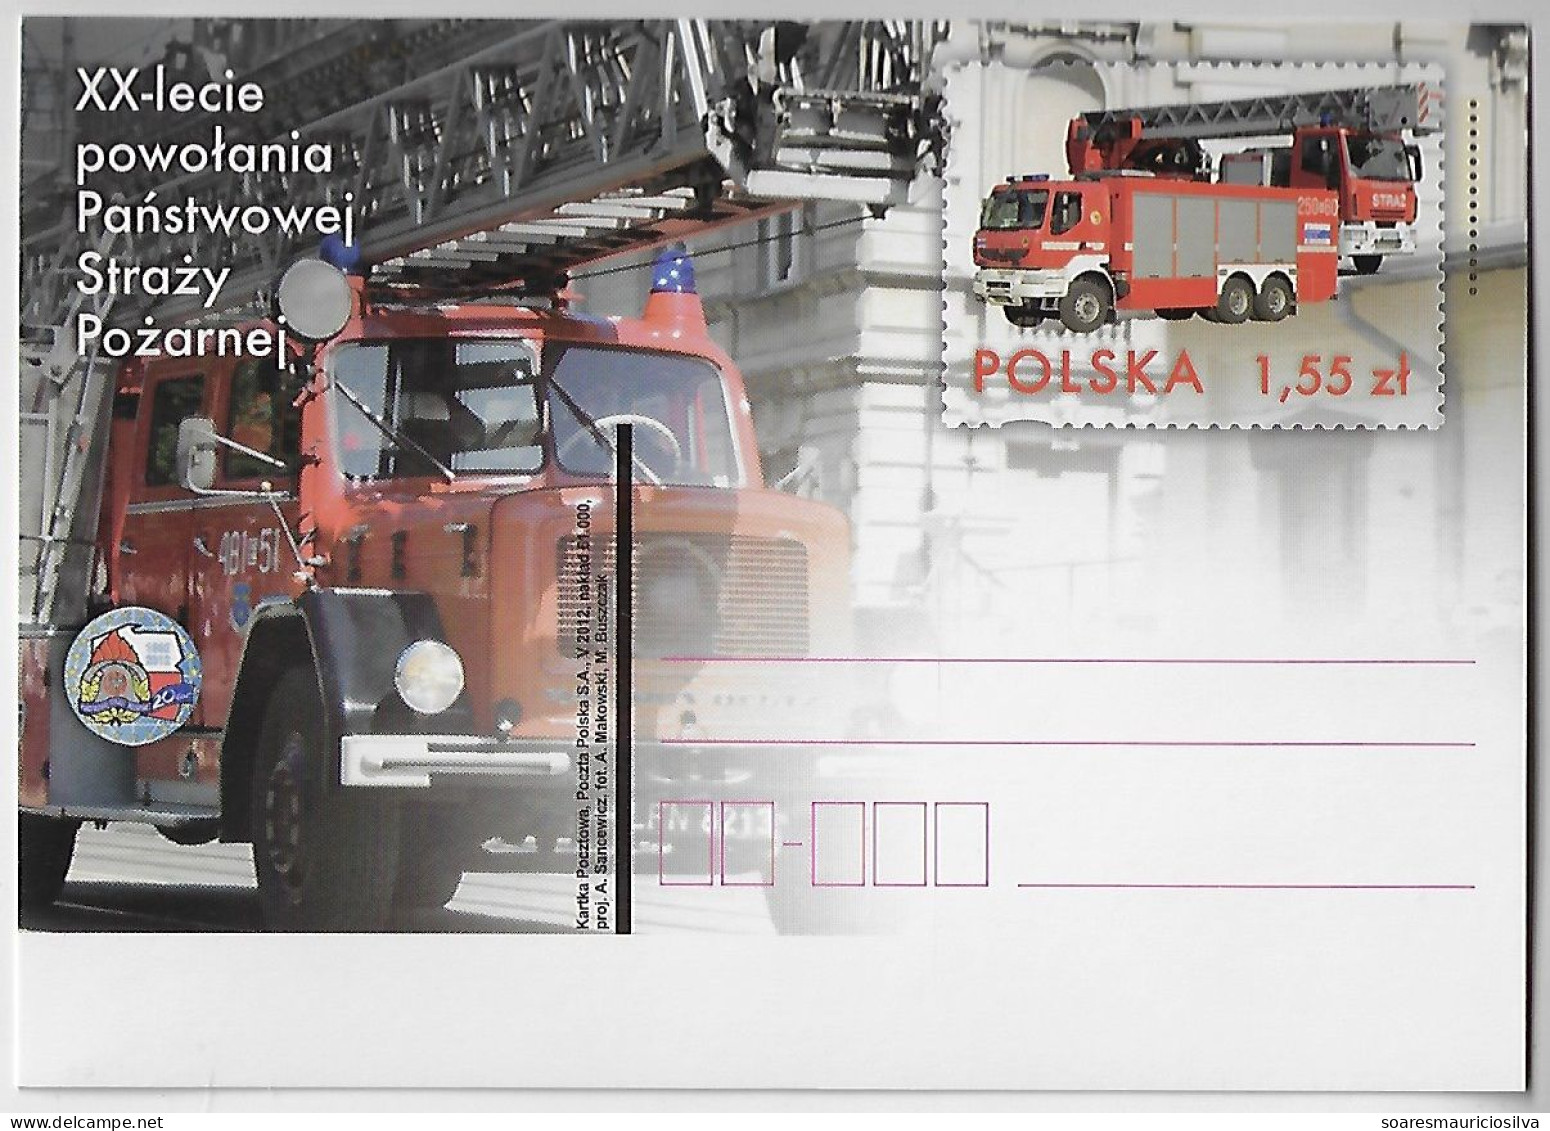 Poland 2012 Postal Stationery Card Stamp 1,55 Zloty 20 Years State Fire Service Firefighter Fireman Firemen Department - Sapeurs-Pompiers